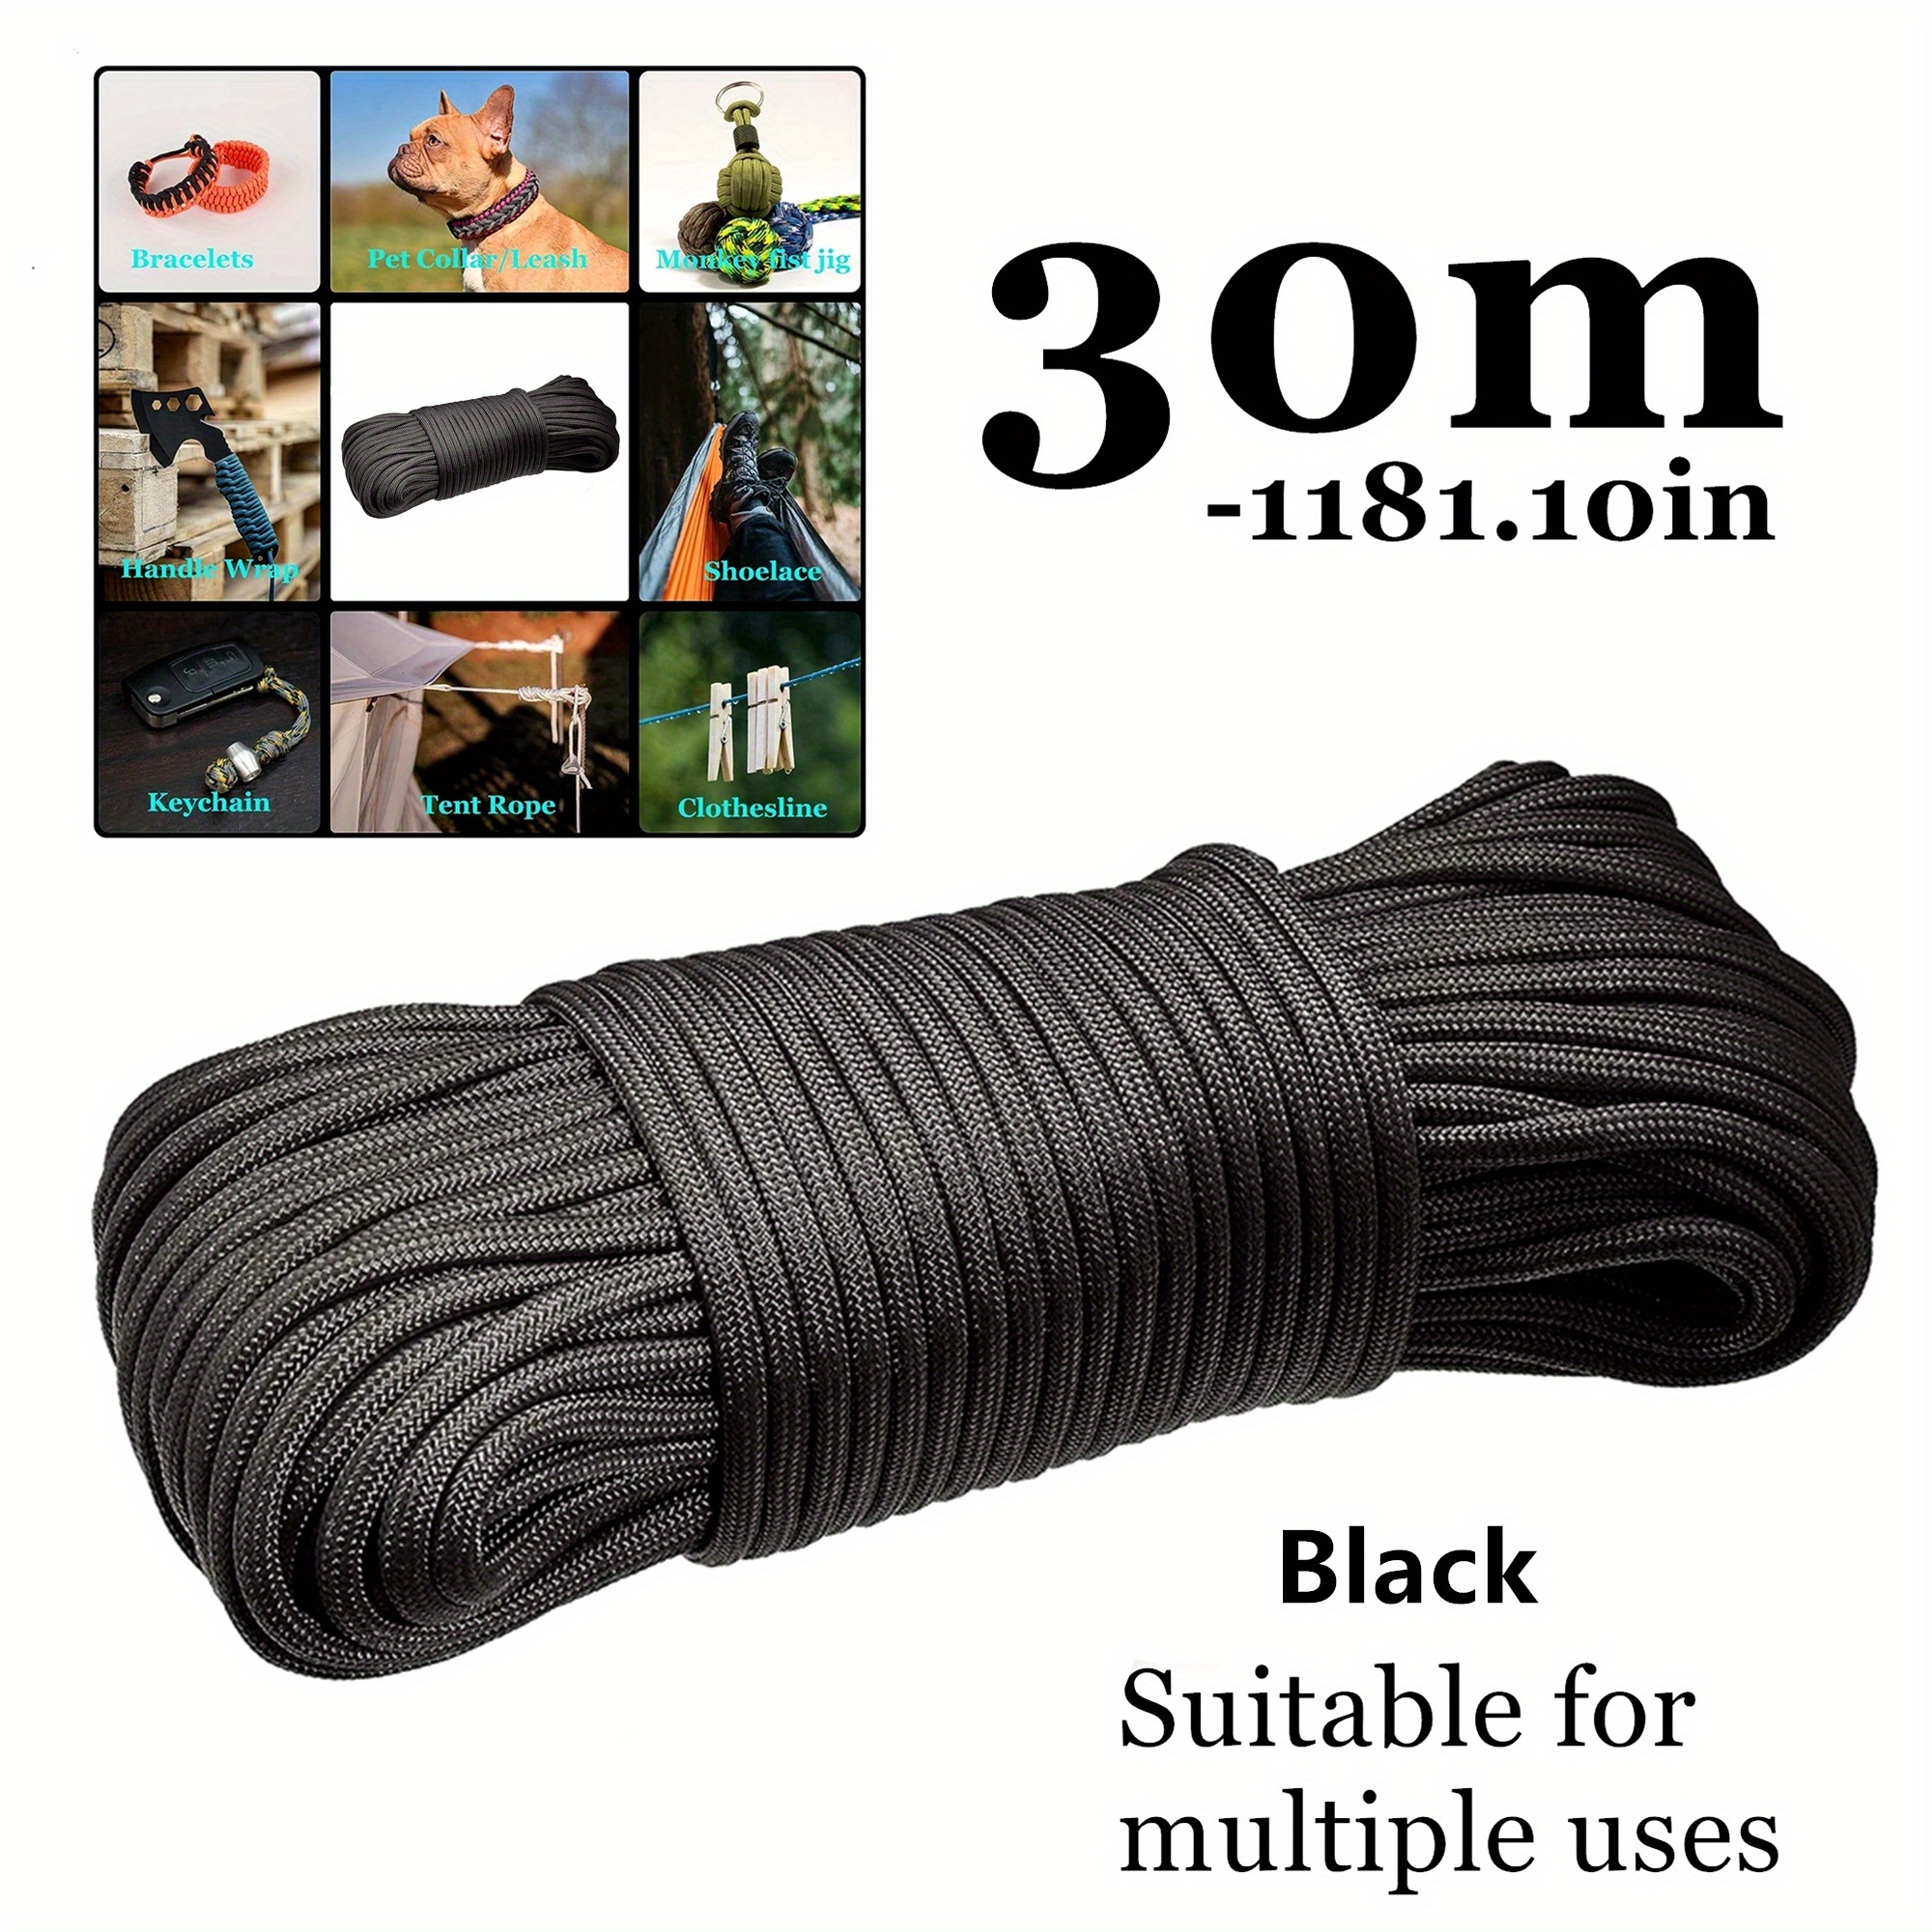 

Black Nylon Paracord Rope, 30m/1181.10in - Durable Utility Cord For Camping, Tying, Fishing, Outdoor Adventures - Low Tensile Strength Under 122 Lbs - Multipurpose Survival Gear Without Magnesium Rod